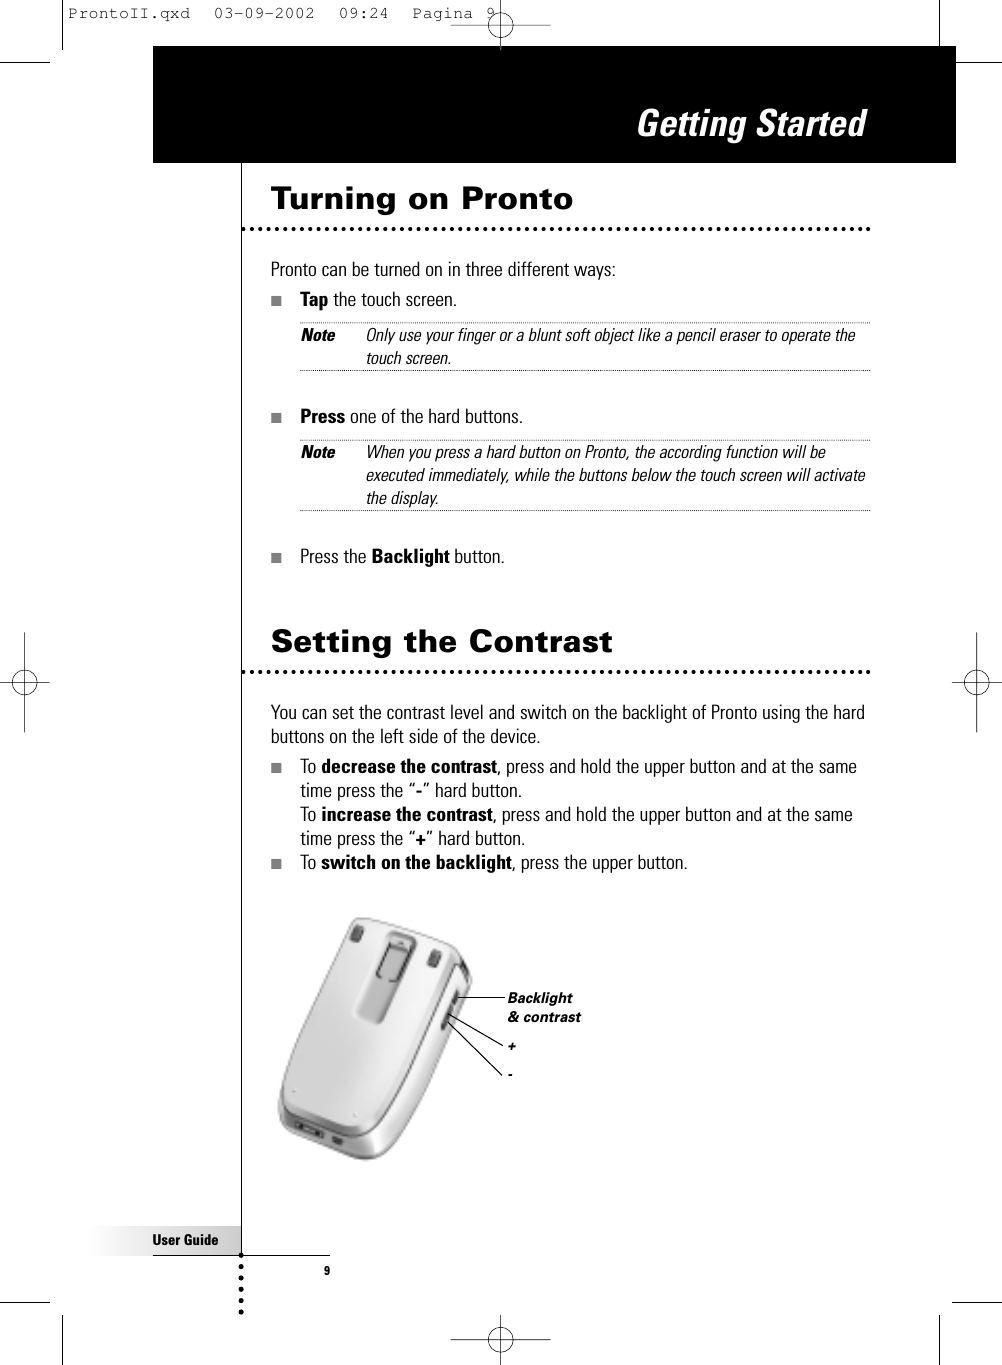 User Guide9Turning on ProntoPronto can be turned on in three different ways:■Tap the touch screen.Note Only use your finger or a blunt soft object like a pencil eraser to operate thetouch screen.■Press one of the hard buttons.Note When you press a hard button on Pronto, the according function will beexecuted immediately, while the buttons below the touch screen will activatethe display.■Press the Backlight button.Getting StartedSetting the ContrastYou can set the contrast level and switch on the backlight of Pronto using the hardbuttons on the left side of the device.■To decrease the contrast, press and hold the upper button and at the sametime press the “-” hard button. To increase the contrast, press and hold the upper button and at the sametime press the “+” hard button.■To switch on the backlight, press the upper button.Backlight &amp; contrast+-ProntoII.qxd  03-09-2002  09:24  Pagina 9